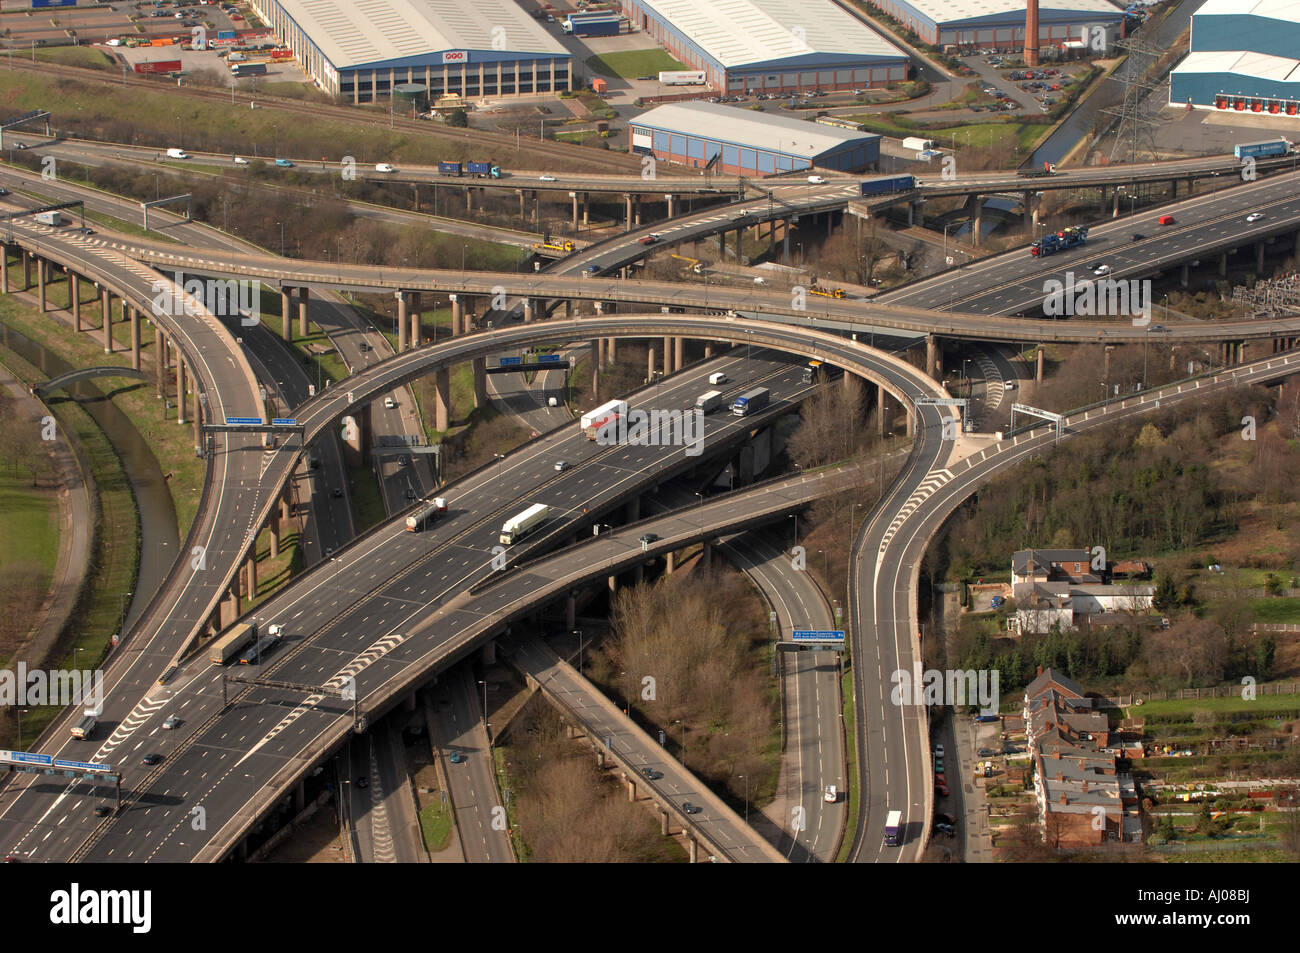 Spaghetti junction of the M6 motorway Birmingham West Midlands Junction 6. M6 motorway motorways intersection aerial view elevated section road highwa Stock Photo